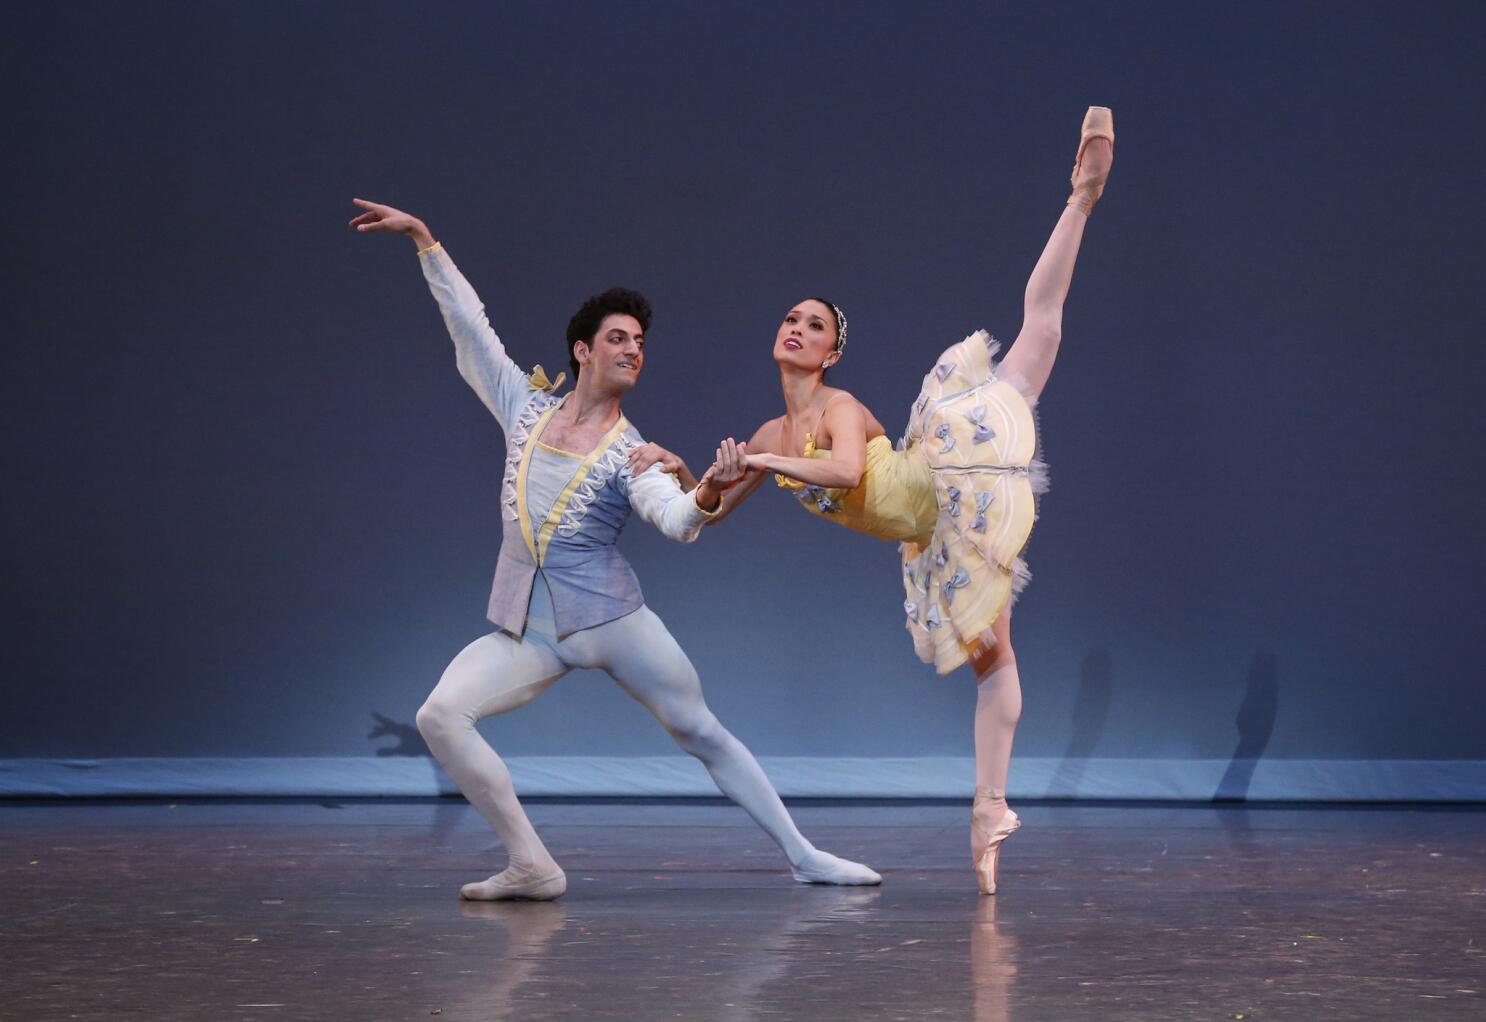 L.A. Ballet's ambitious all-Balanchine program leads to missteps